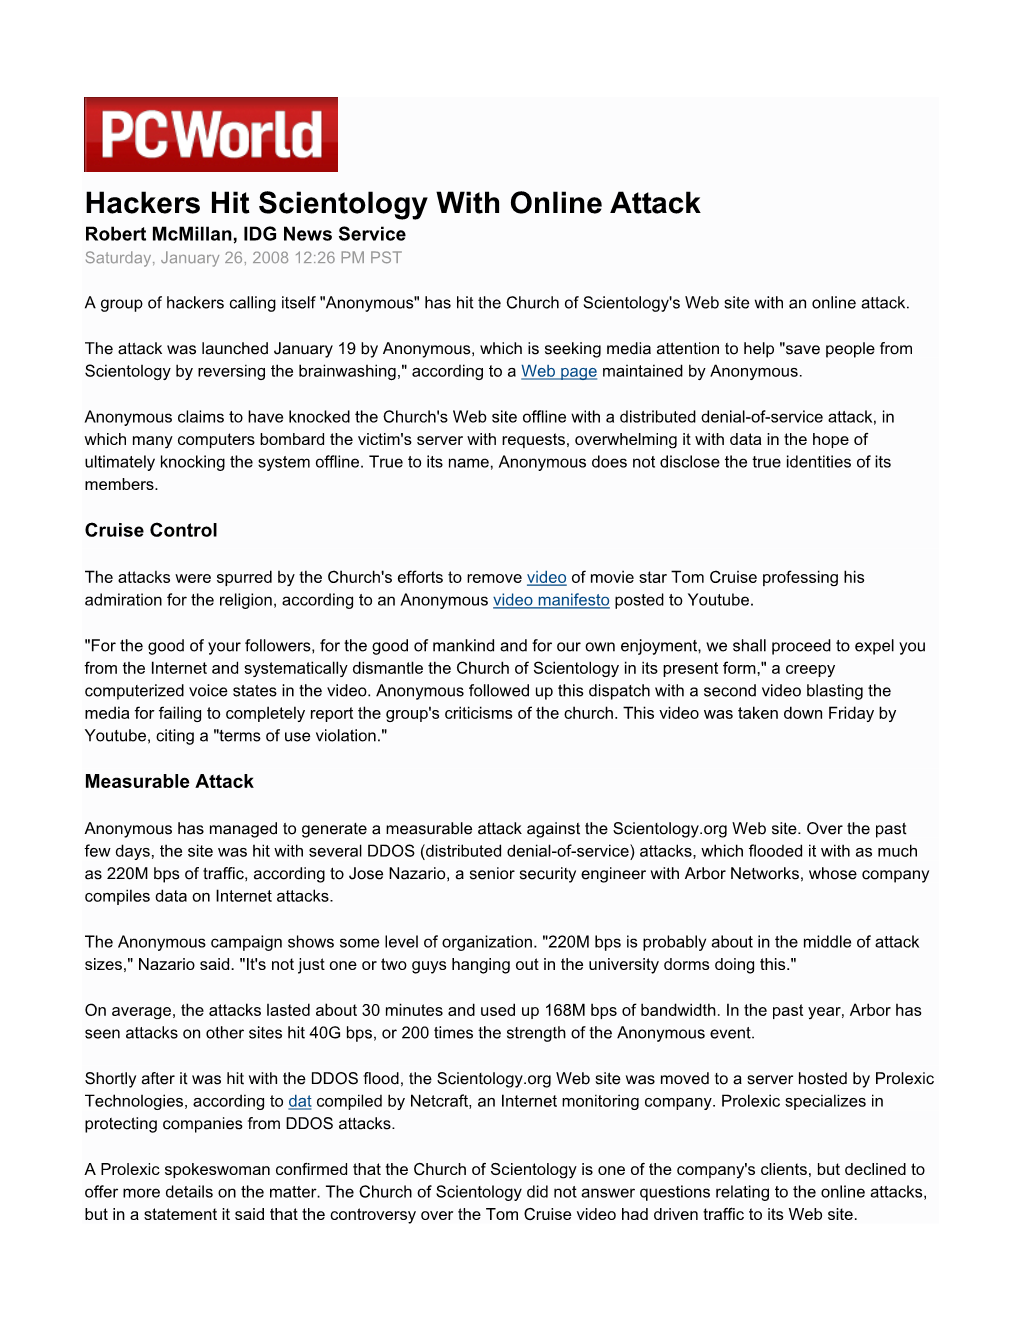 Hackers Hit Scientology with Online Attack Robert Mcmillan, IDG News Service Saturday, January 26, 2008 12:26 PM PST